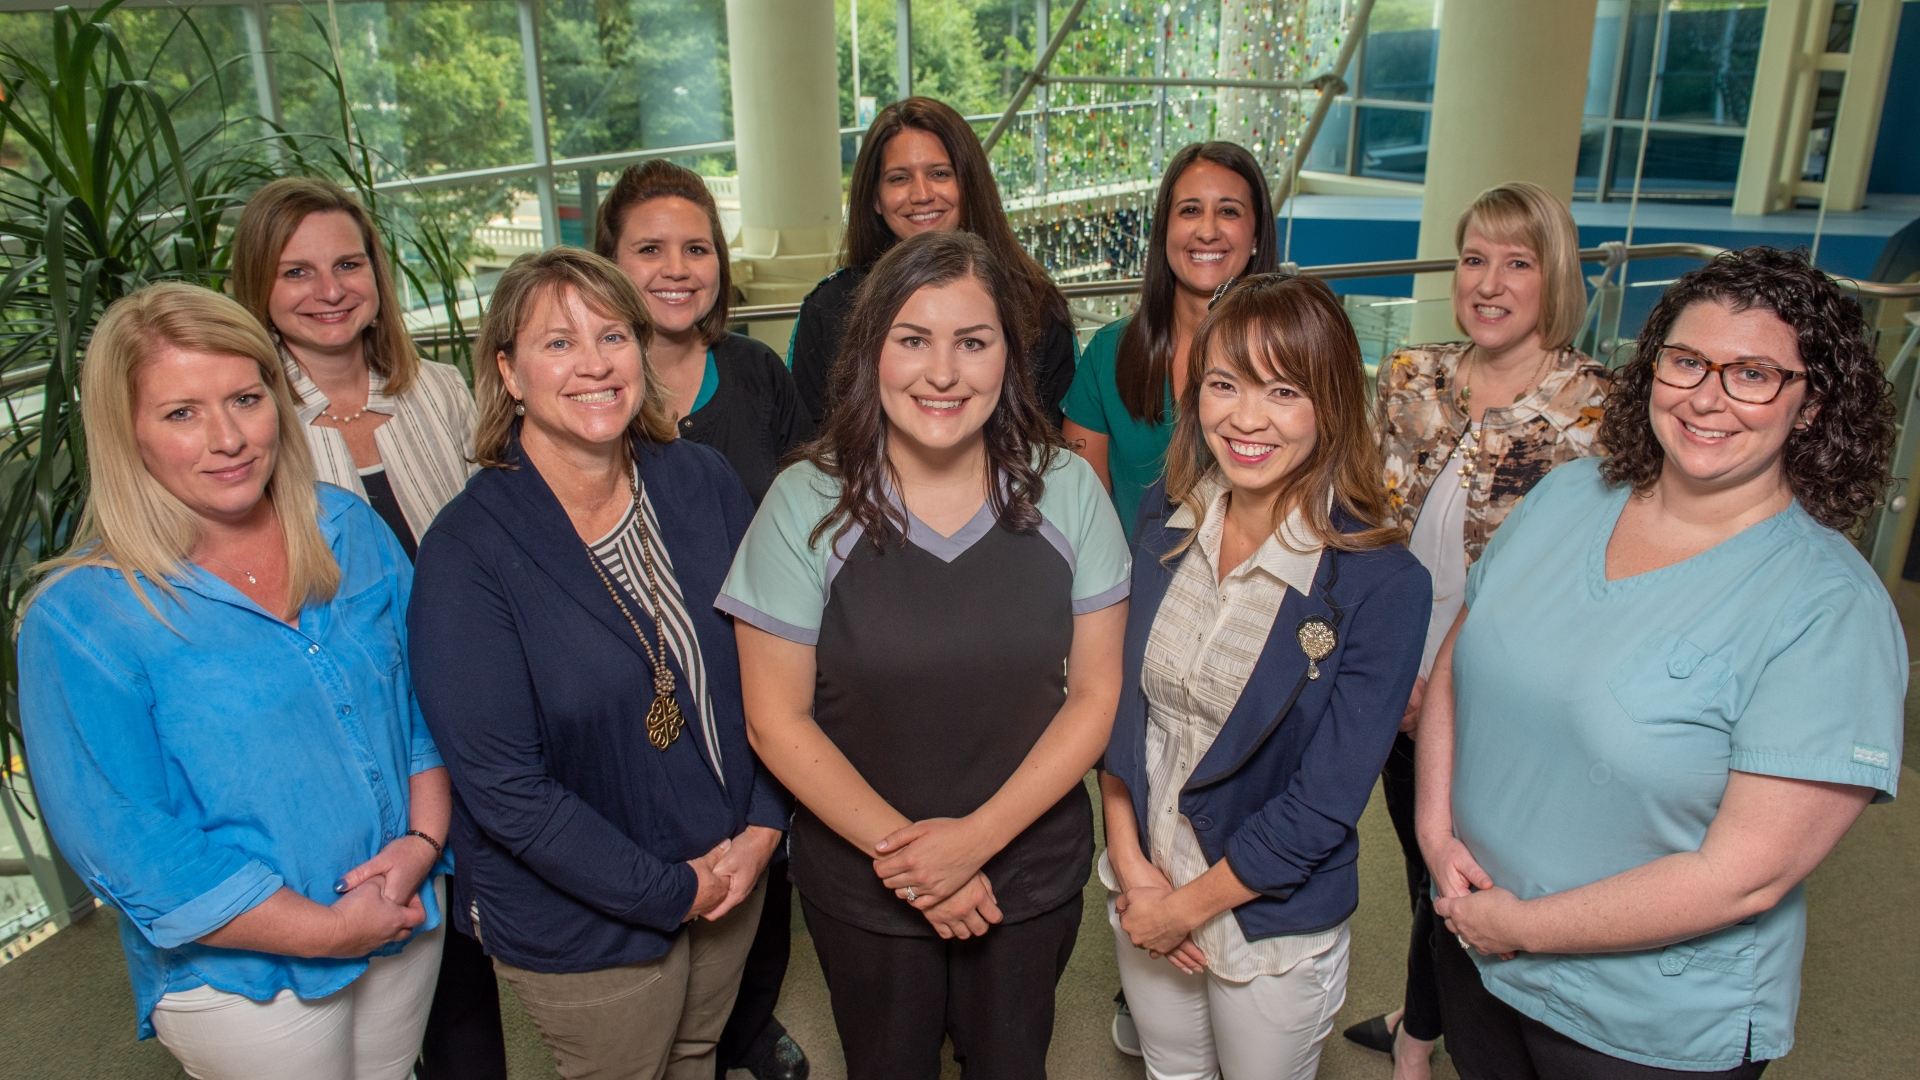 Congratulations to our North Carolina Great 100 Nurses! They demonstrate outstanding professional ability and contributions to healthcare. Nominated by their peers, these nurses are among our best